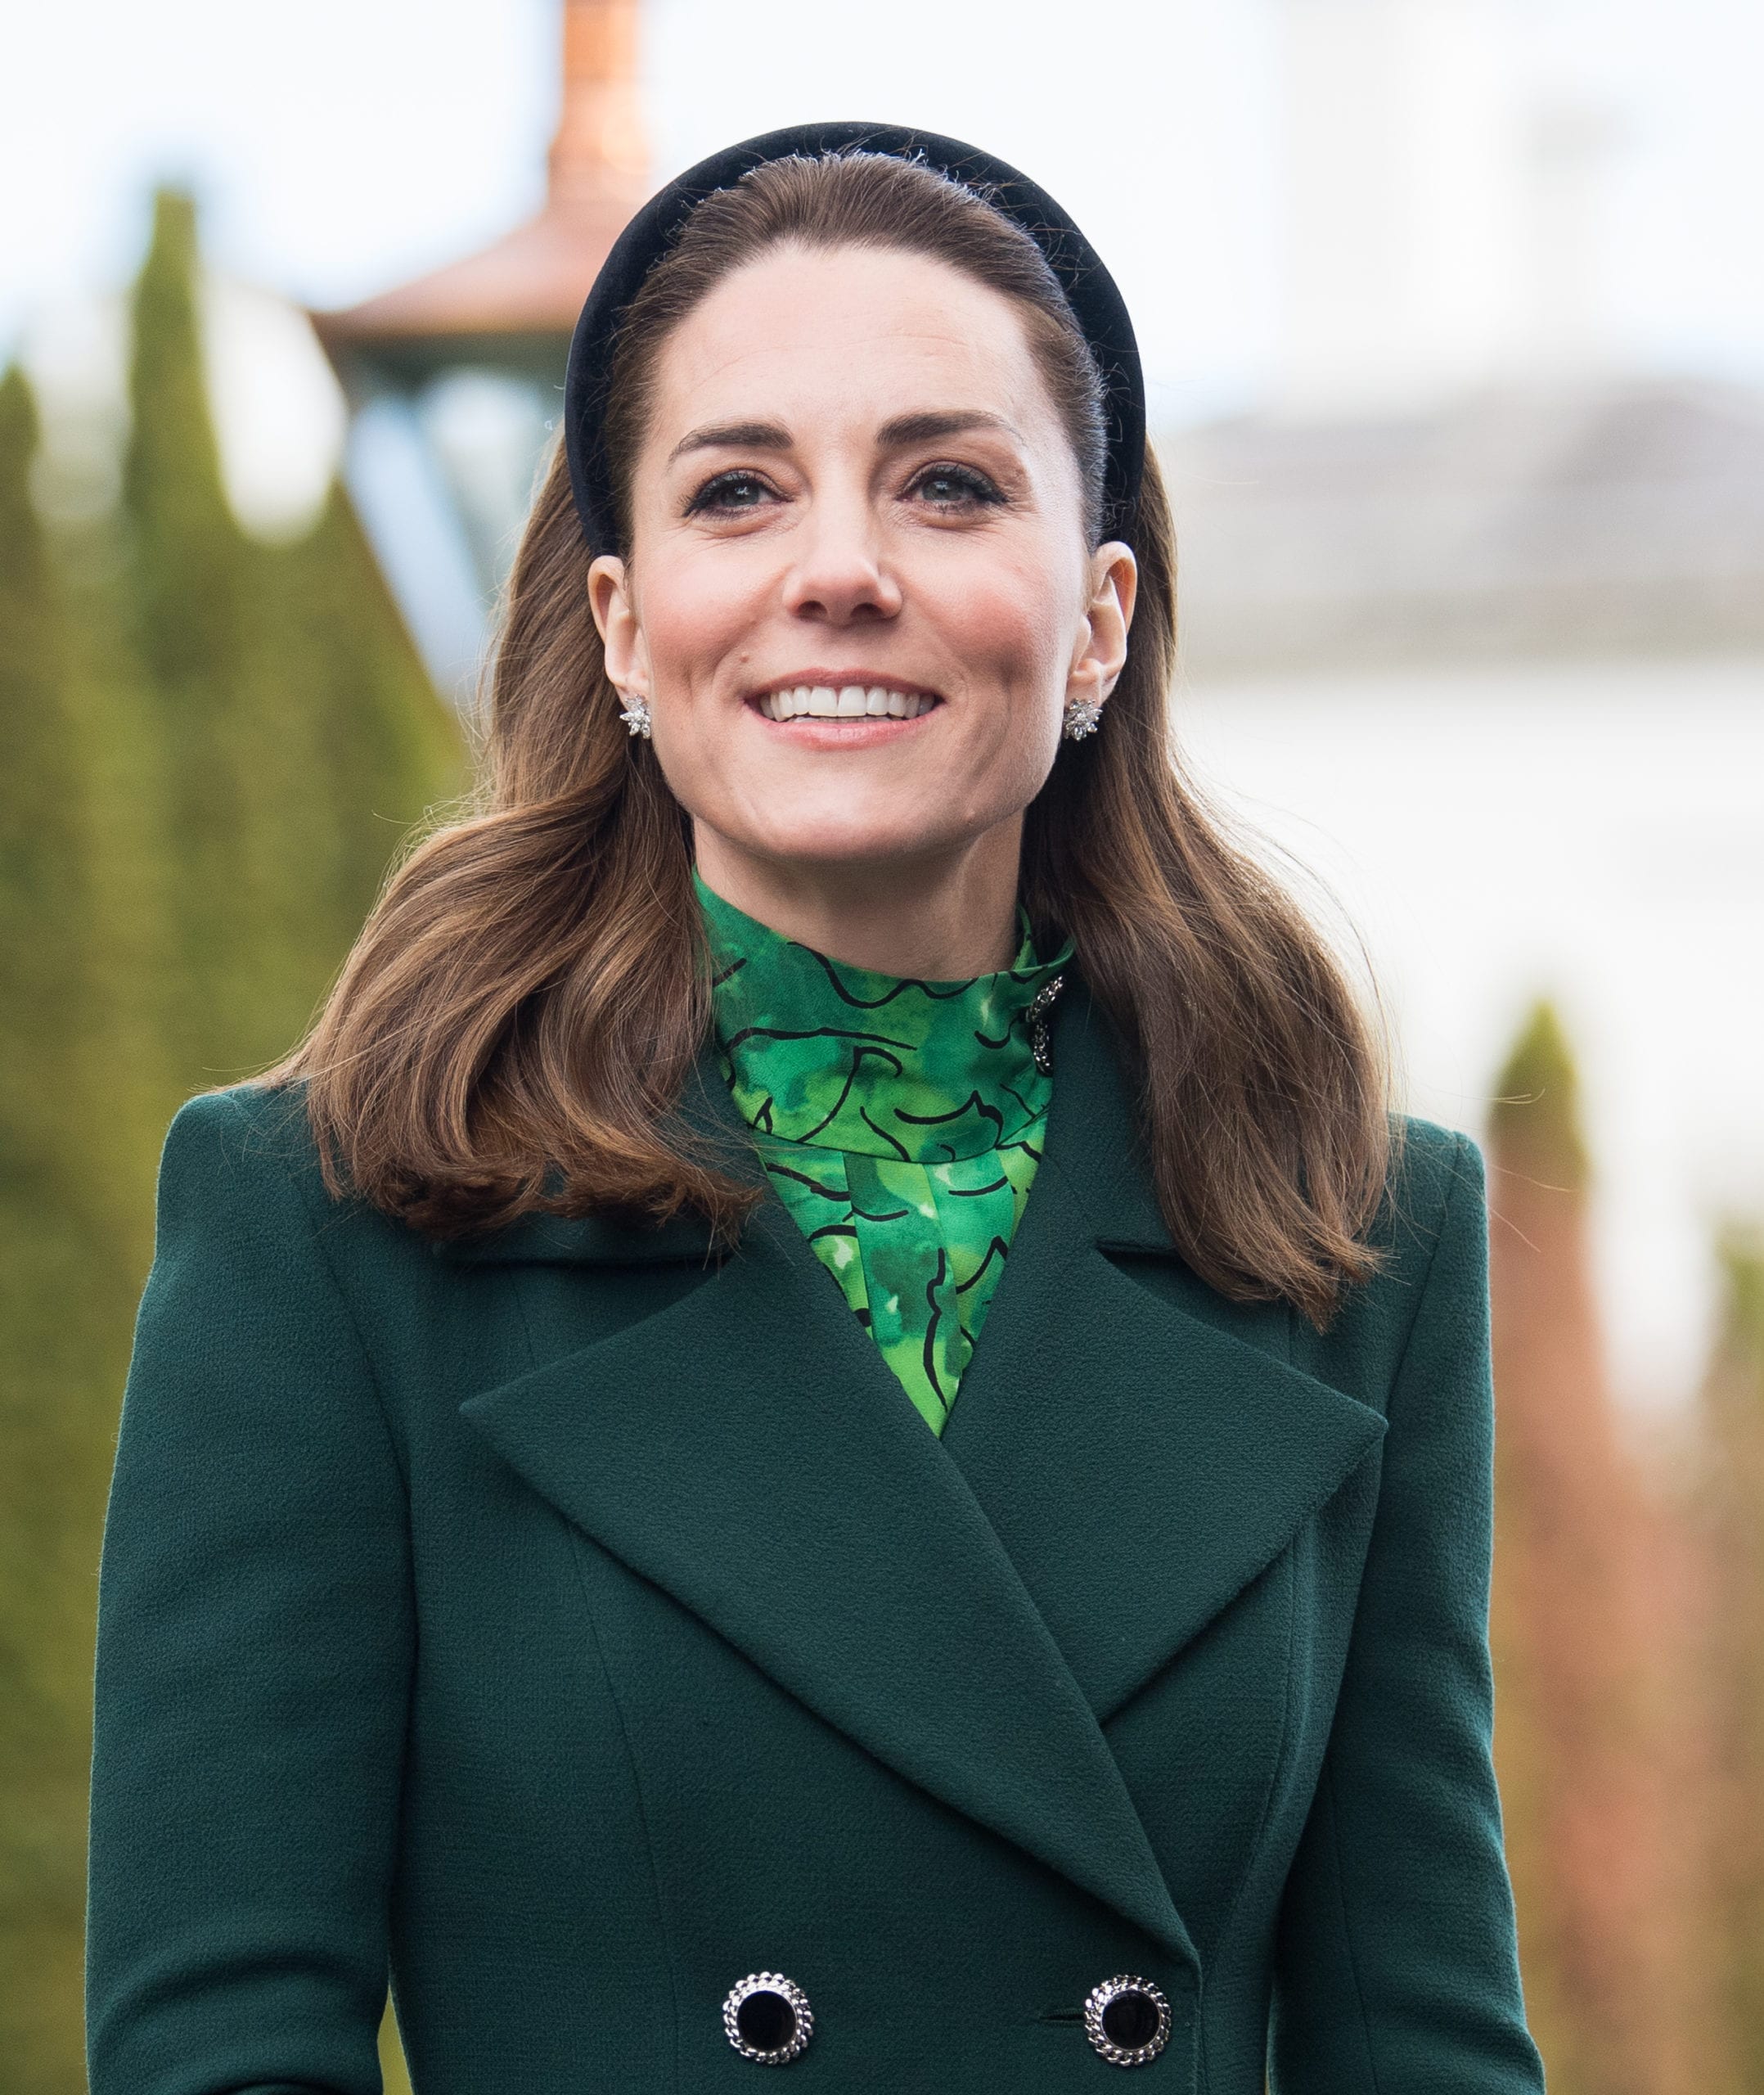 DUBLIN, IRELAND - MARCH 03: Catherine, Duchess of Cambridge during a meeting at Áras an Uachtaráin on March 03, 2020 in Dublin, Ireland. The Duke and Duchess of Cambridge are undertaking an official visit to Ireland between Tuesday 3rd March and Thursday 5th March, at the request of the Foreign and Commonwealth Office. (Photo by Samir Hussein/WireImage)